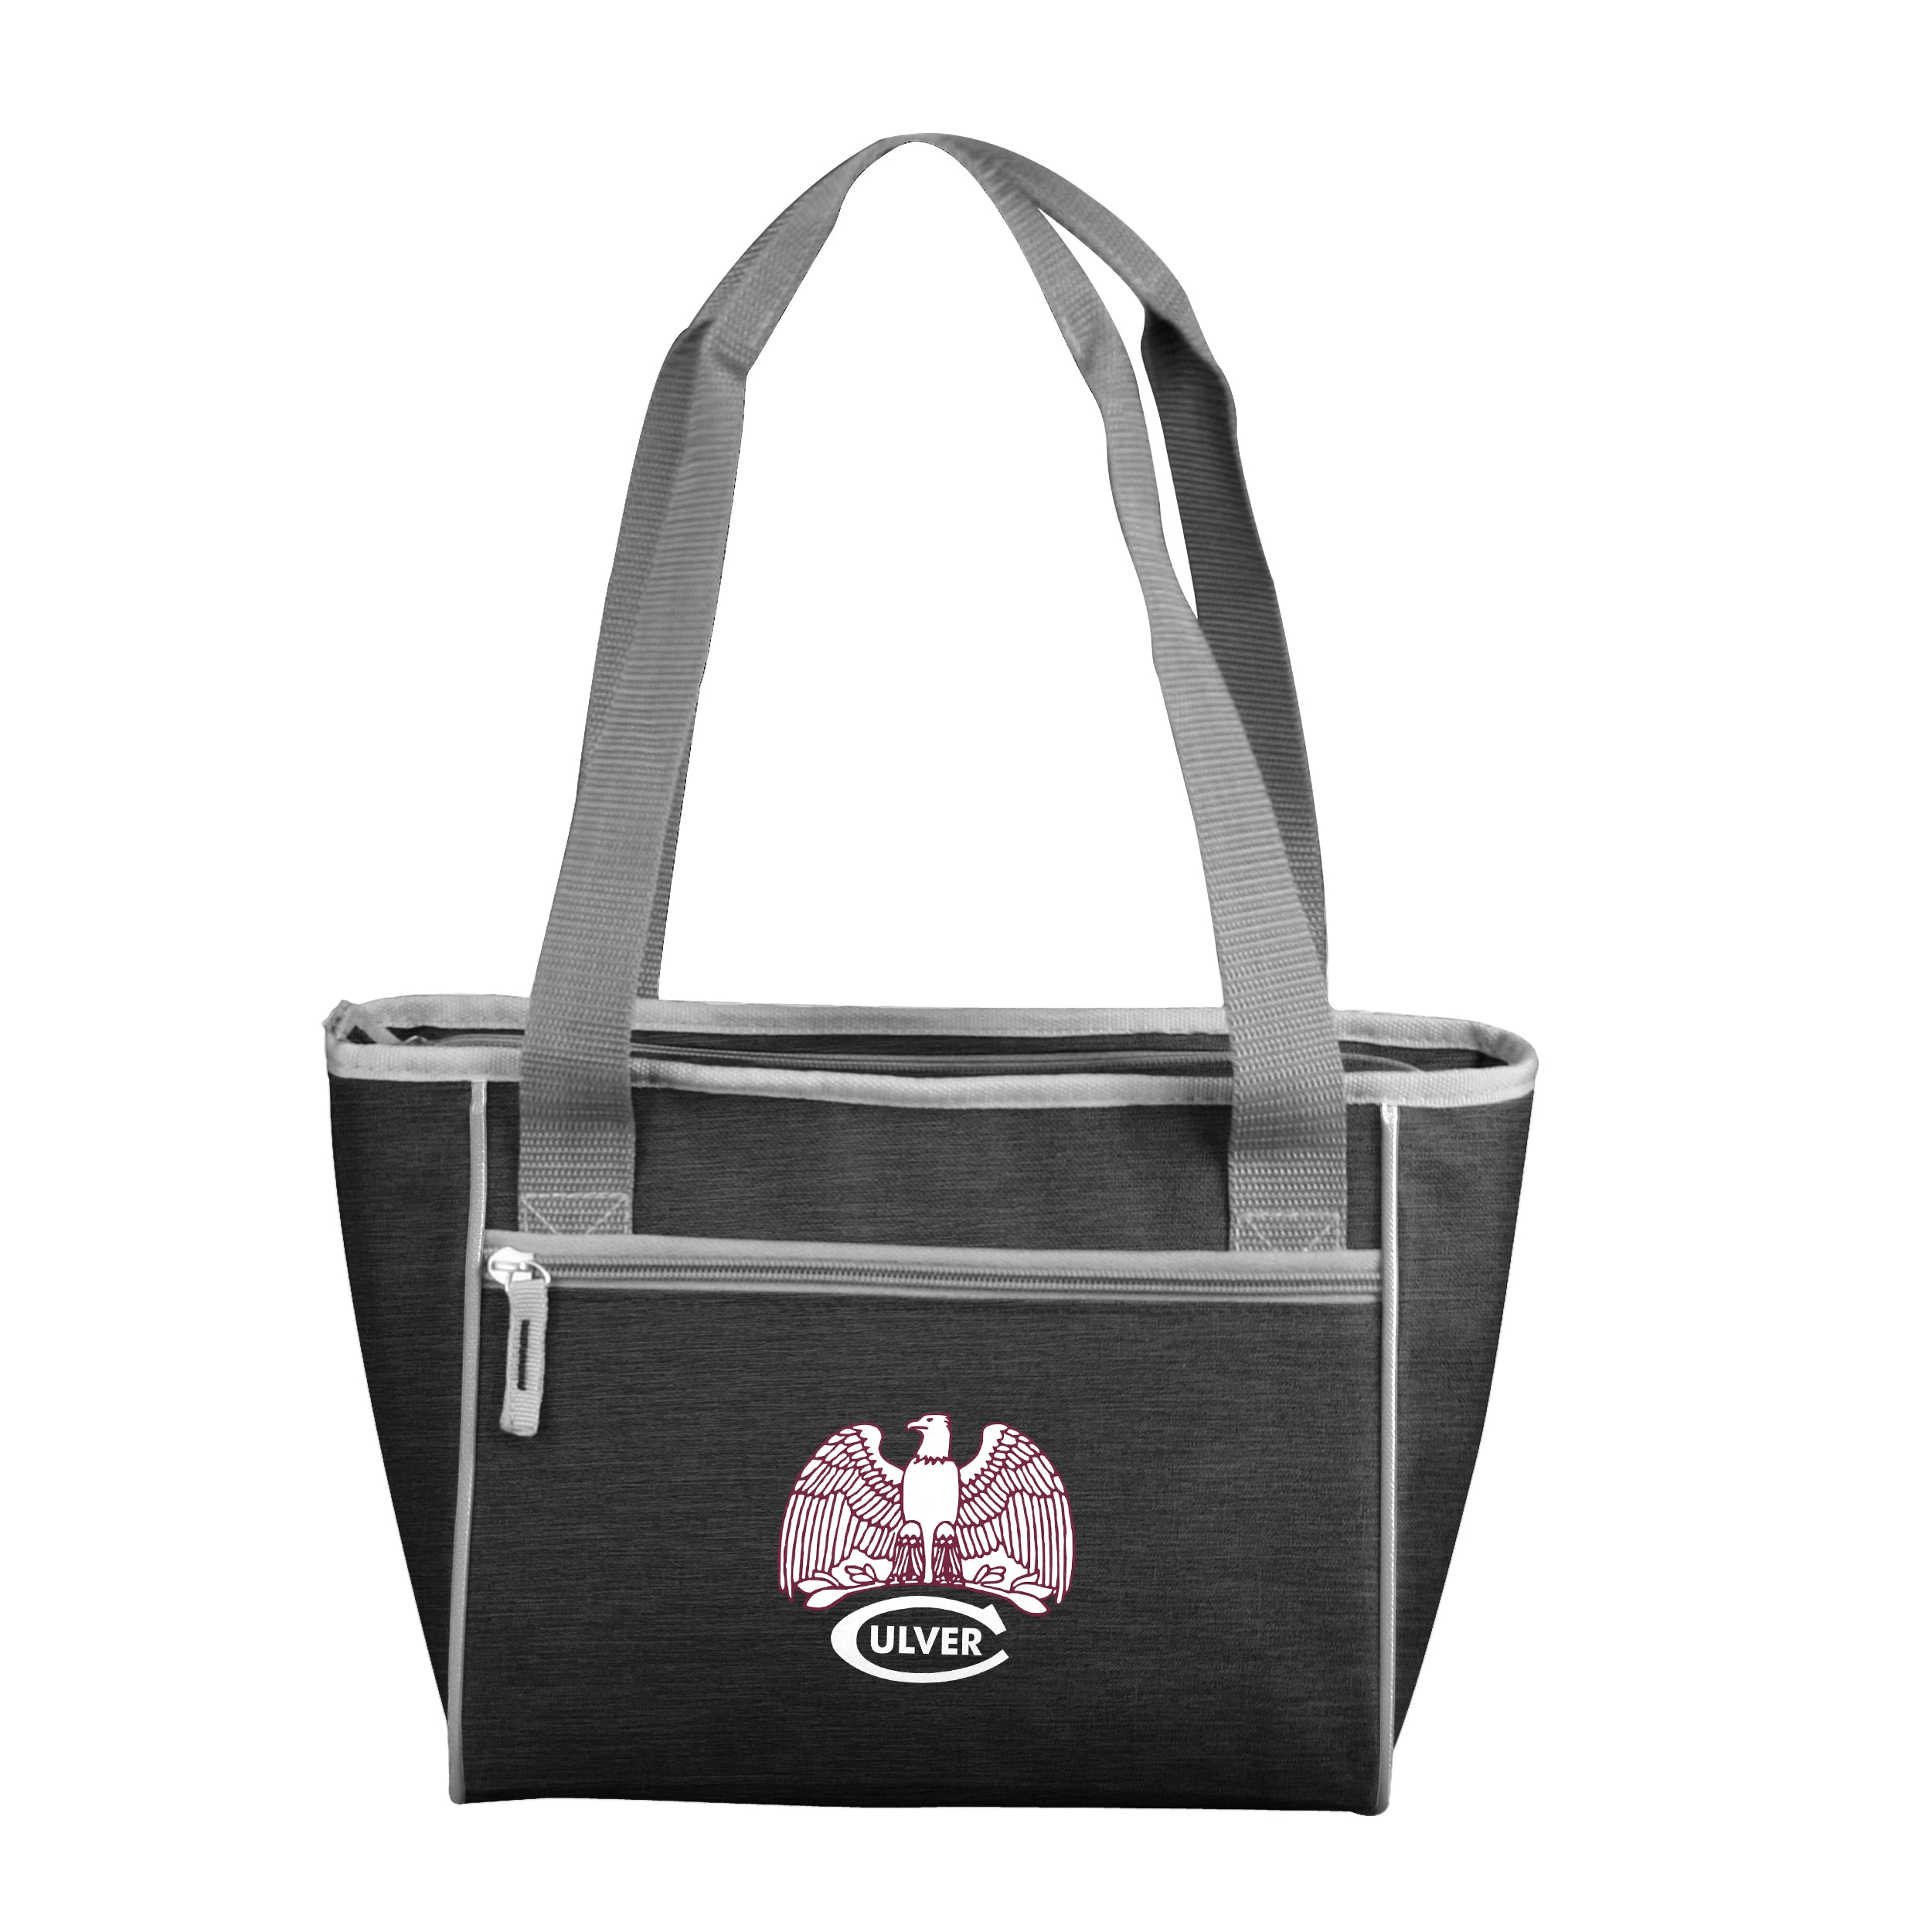 Eagle Crosshatch Cooler Tote -16 Can Capacity - Charcoal Grey